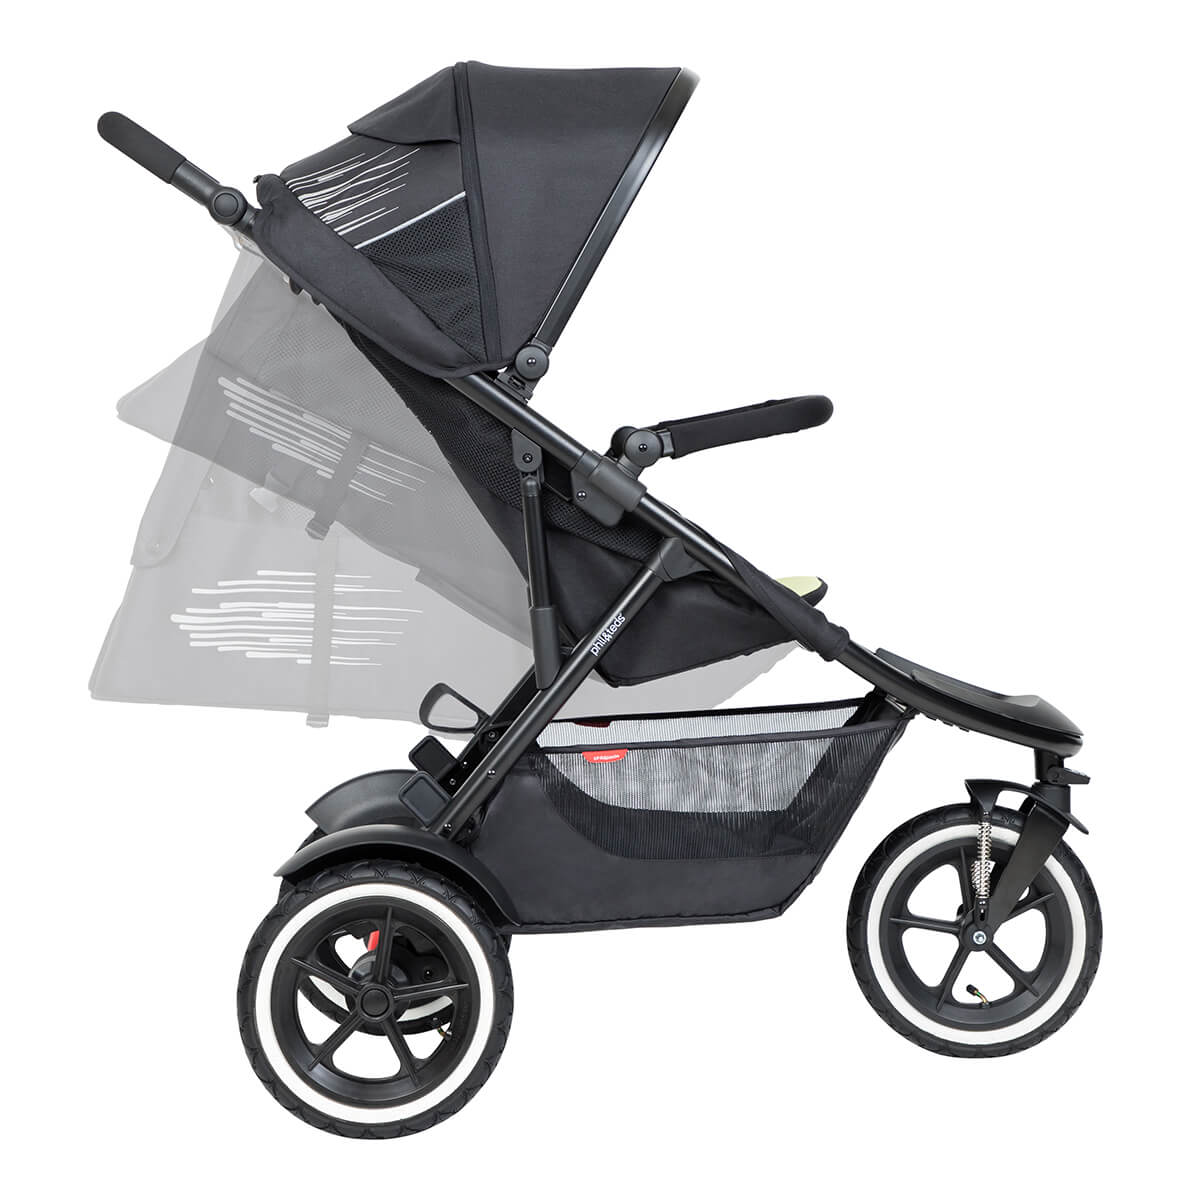 https://cdn.accentuate.io/7749831459010/19466203824322/philteds-sport-buggy-can-recline-in-multiple-angles-including-full-recline-for-newborn-baby-v1700693412078.jpg?1200x1200